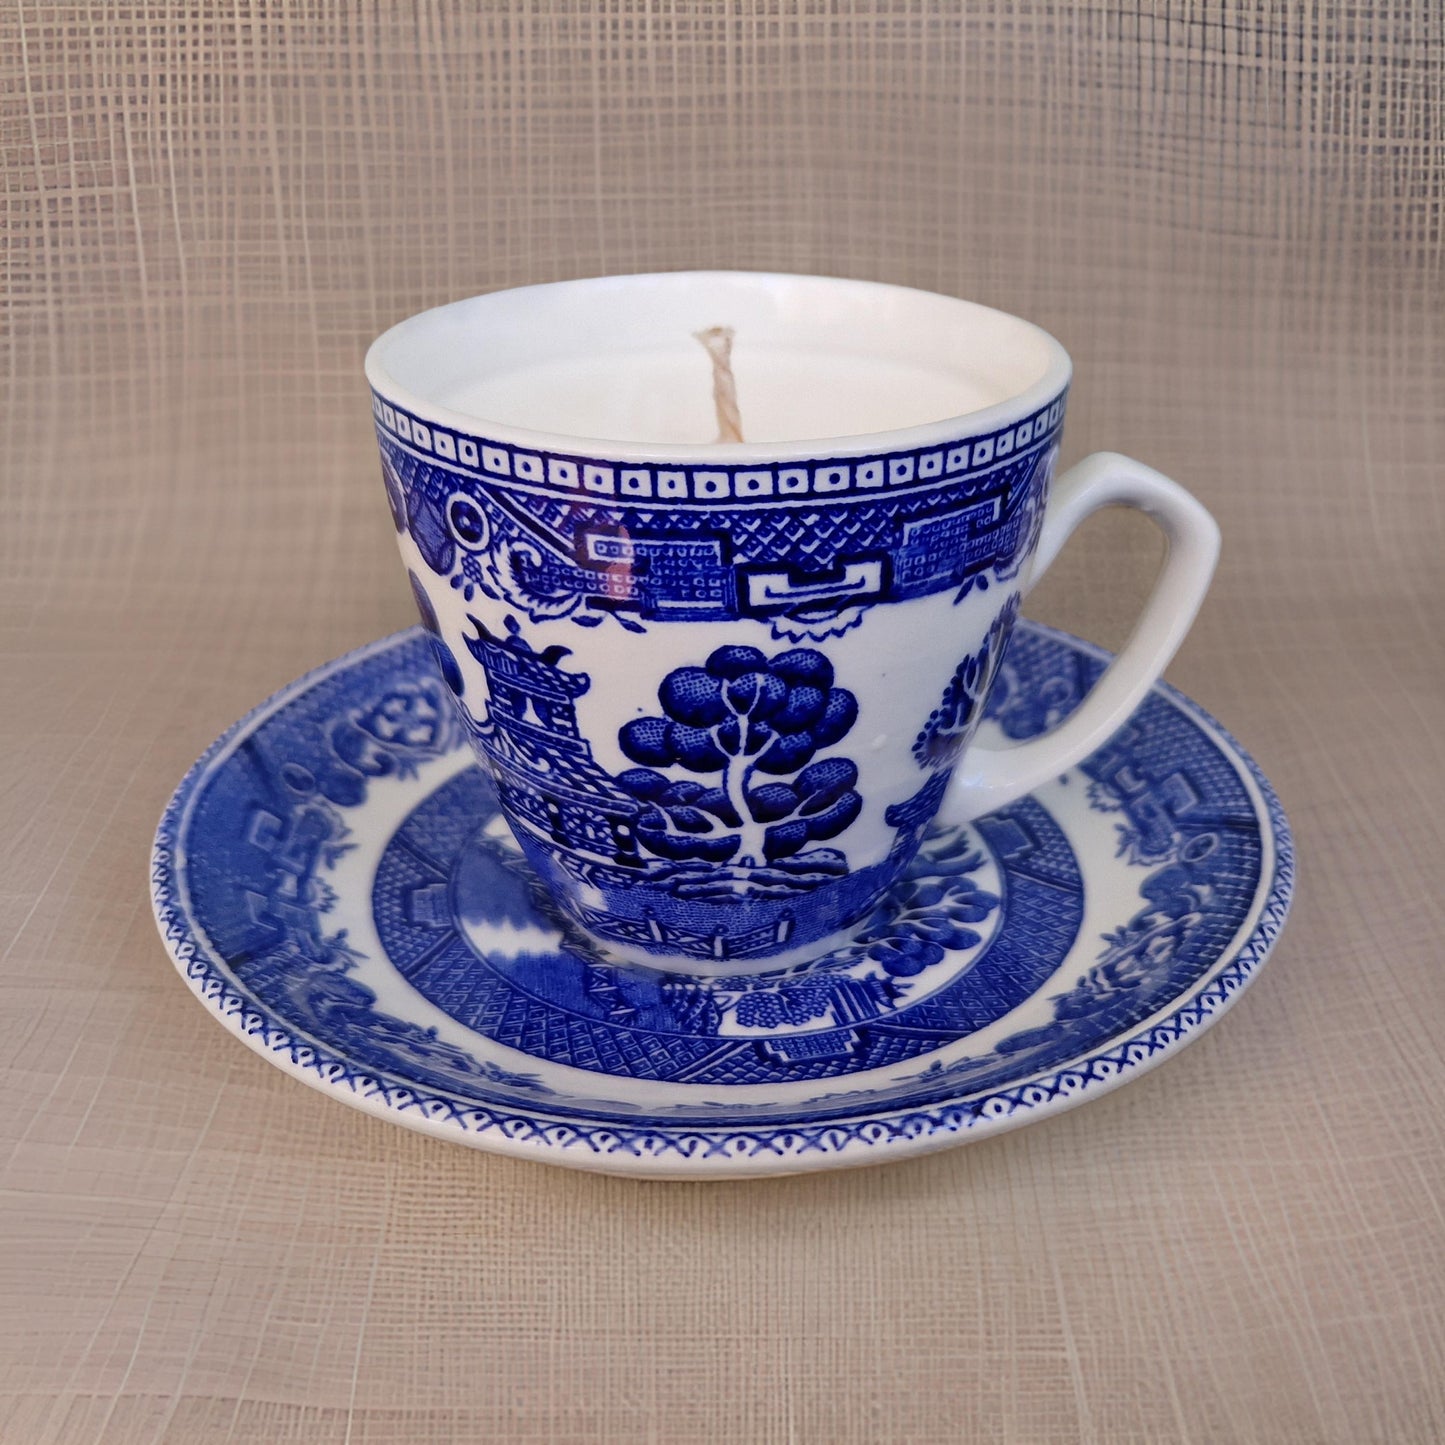 Blue Willow mini teacup candle-1